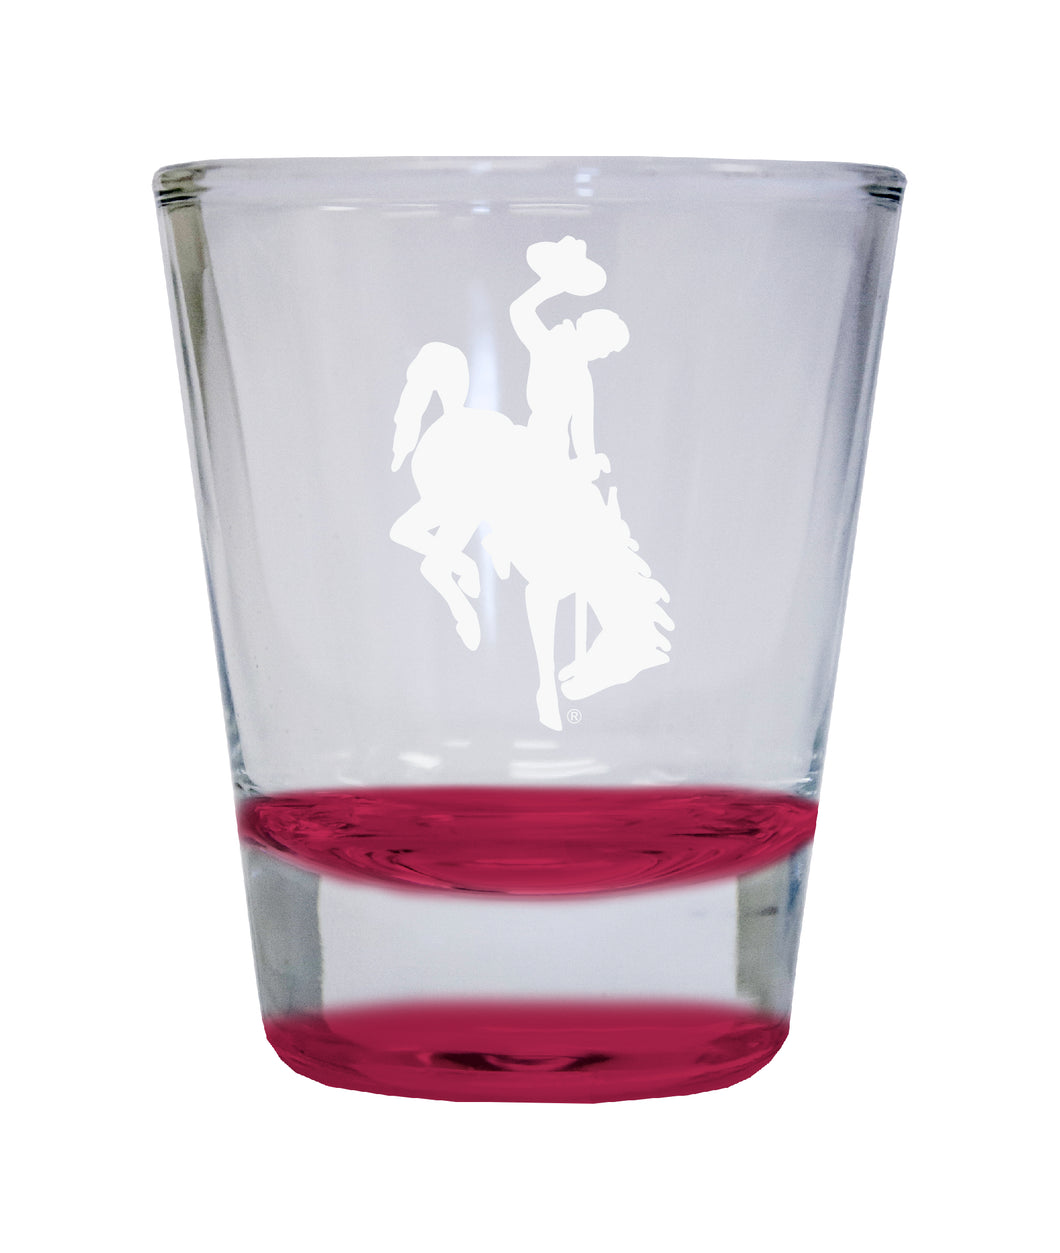 University of Wyoming Etched Round Shot Glass 2 oz Red